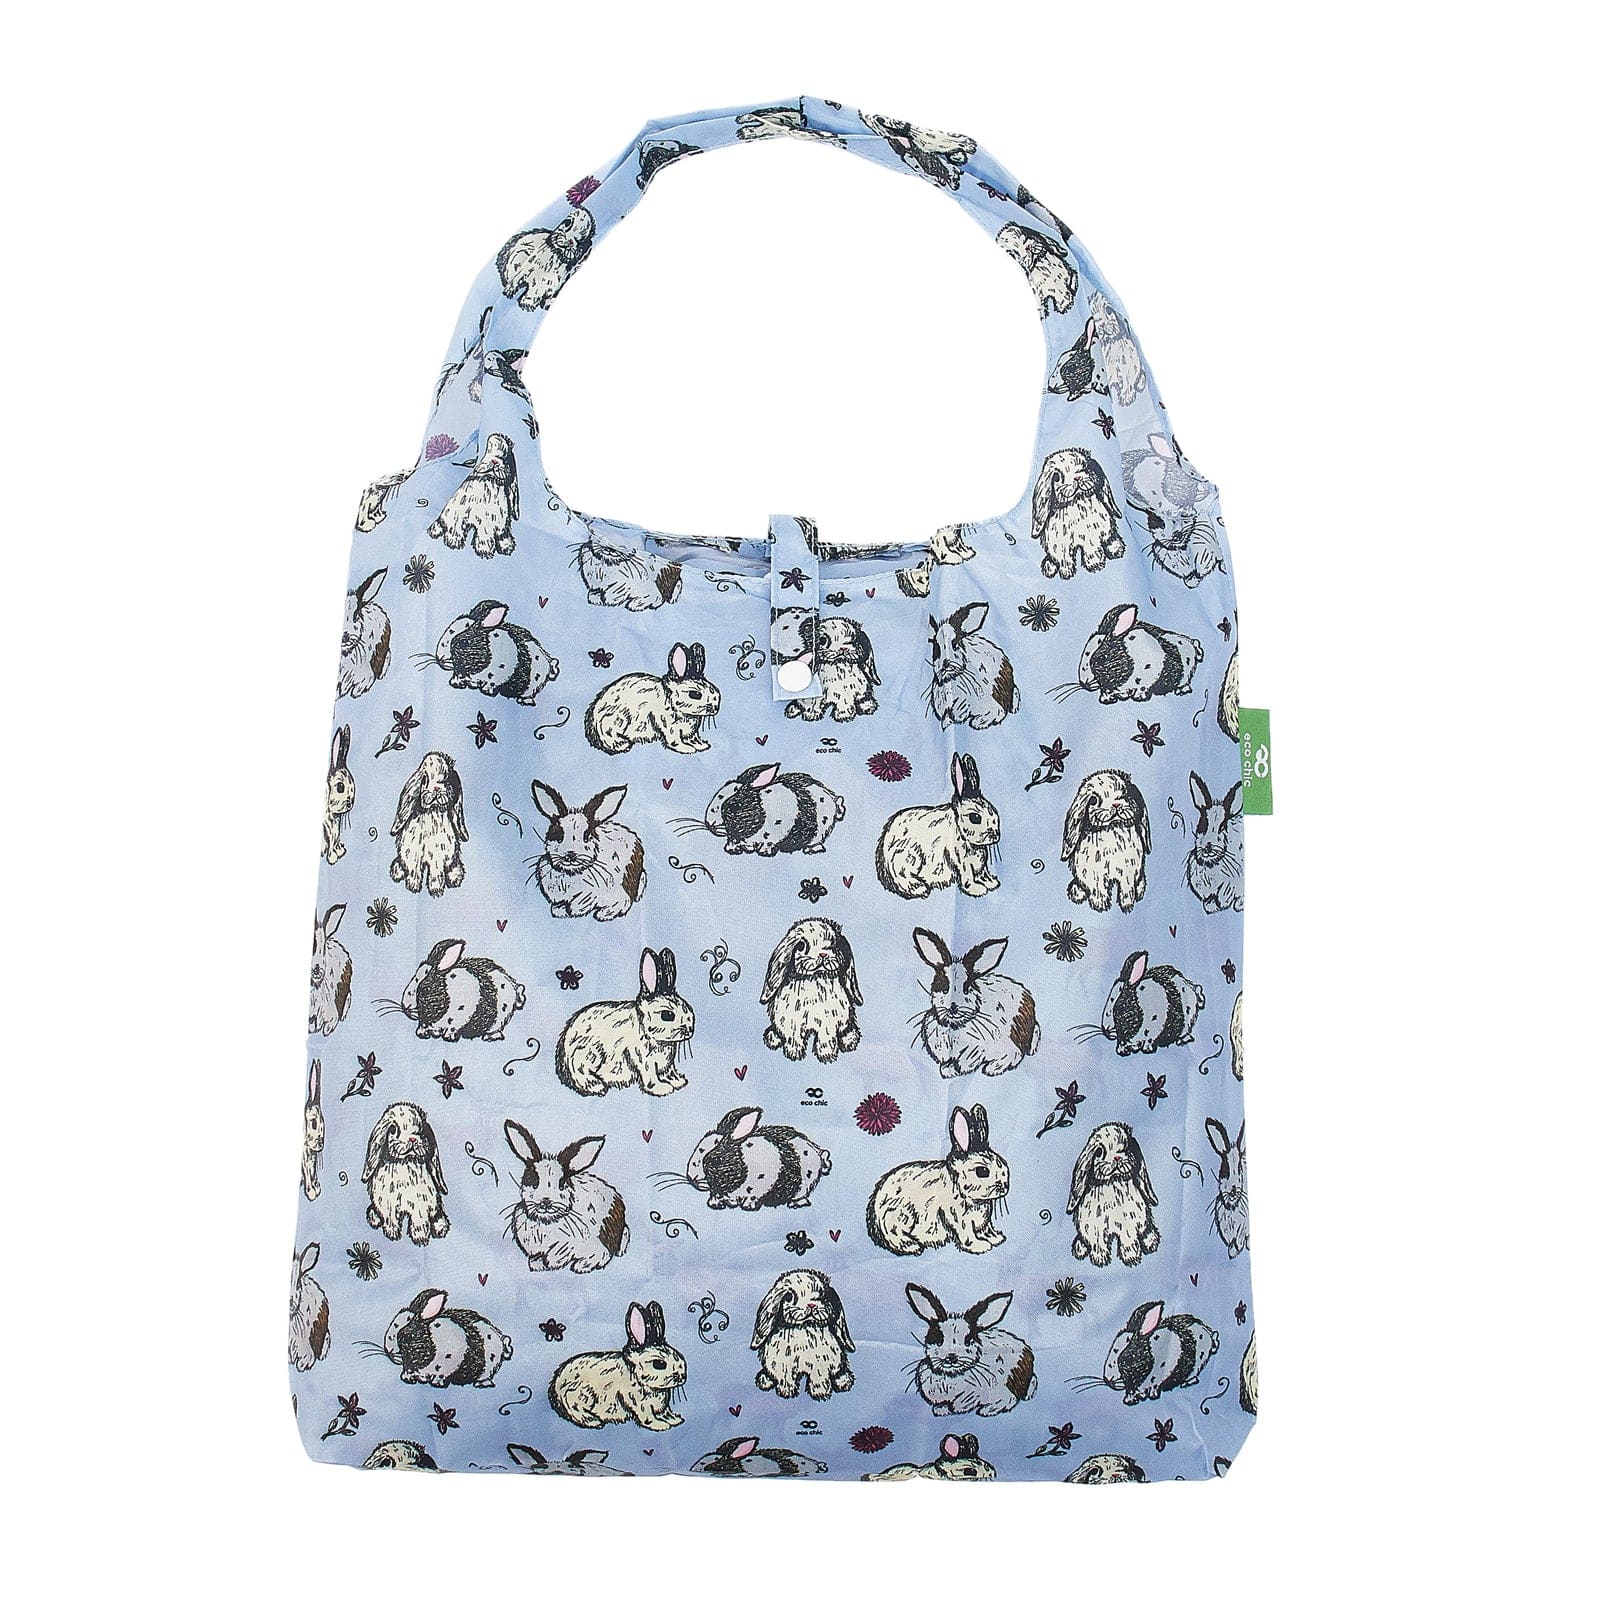 Eco Chic Baby Blue Eco Chic Lightweight Foldable Reusable Shopping Bag Bunny